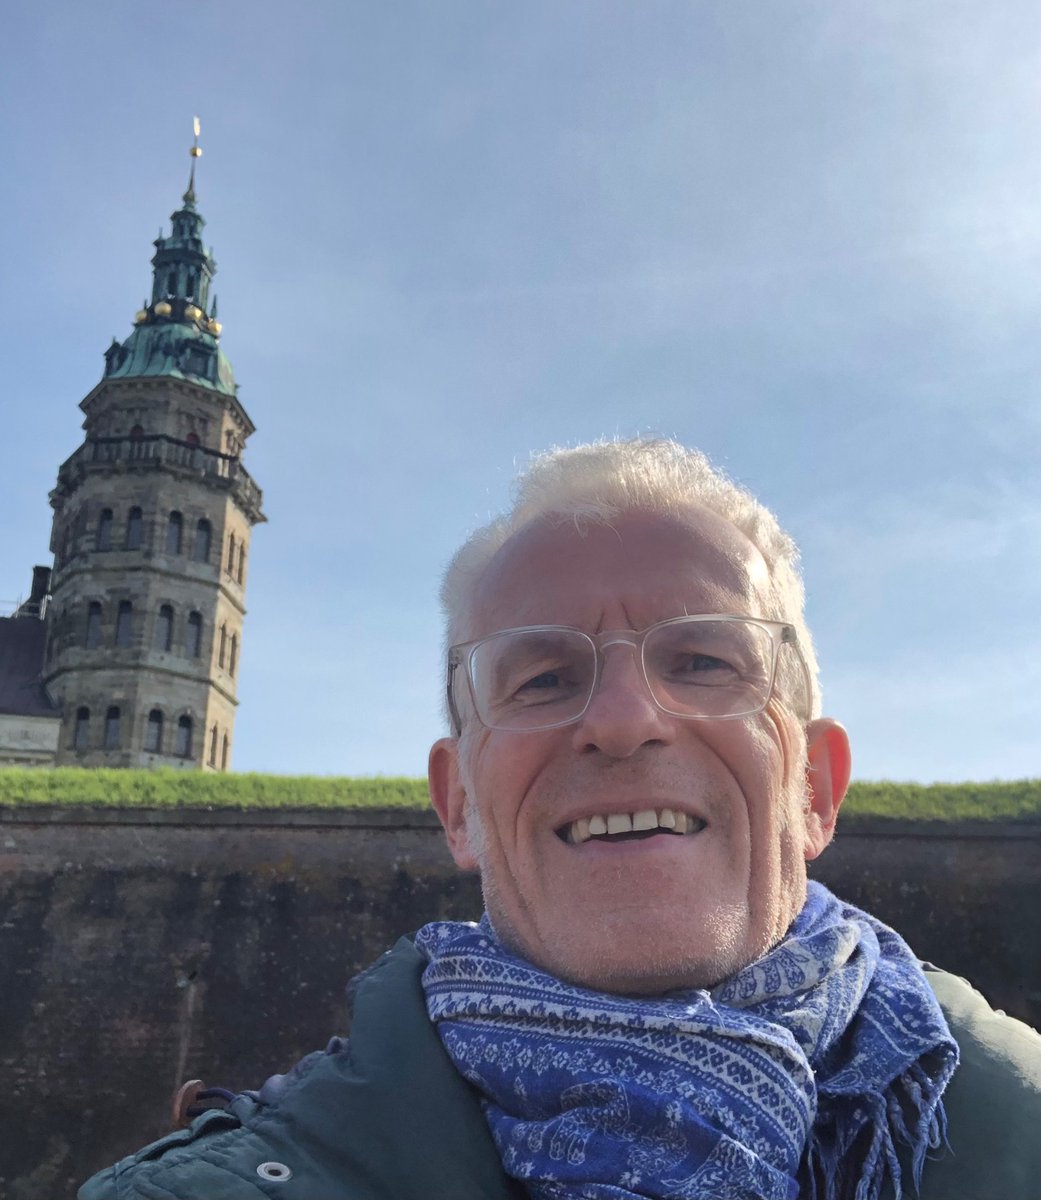 Hamlet’s castle at Helsingør.
In Denmark for a meeting on a project, which I hope is going to be rather than not to be.

#fingerscrossed #newproject #funonthehorizon

#meanwhilePleaseReadMyMerdeAtTheParisOlympics